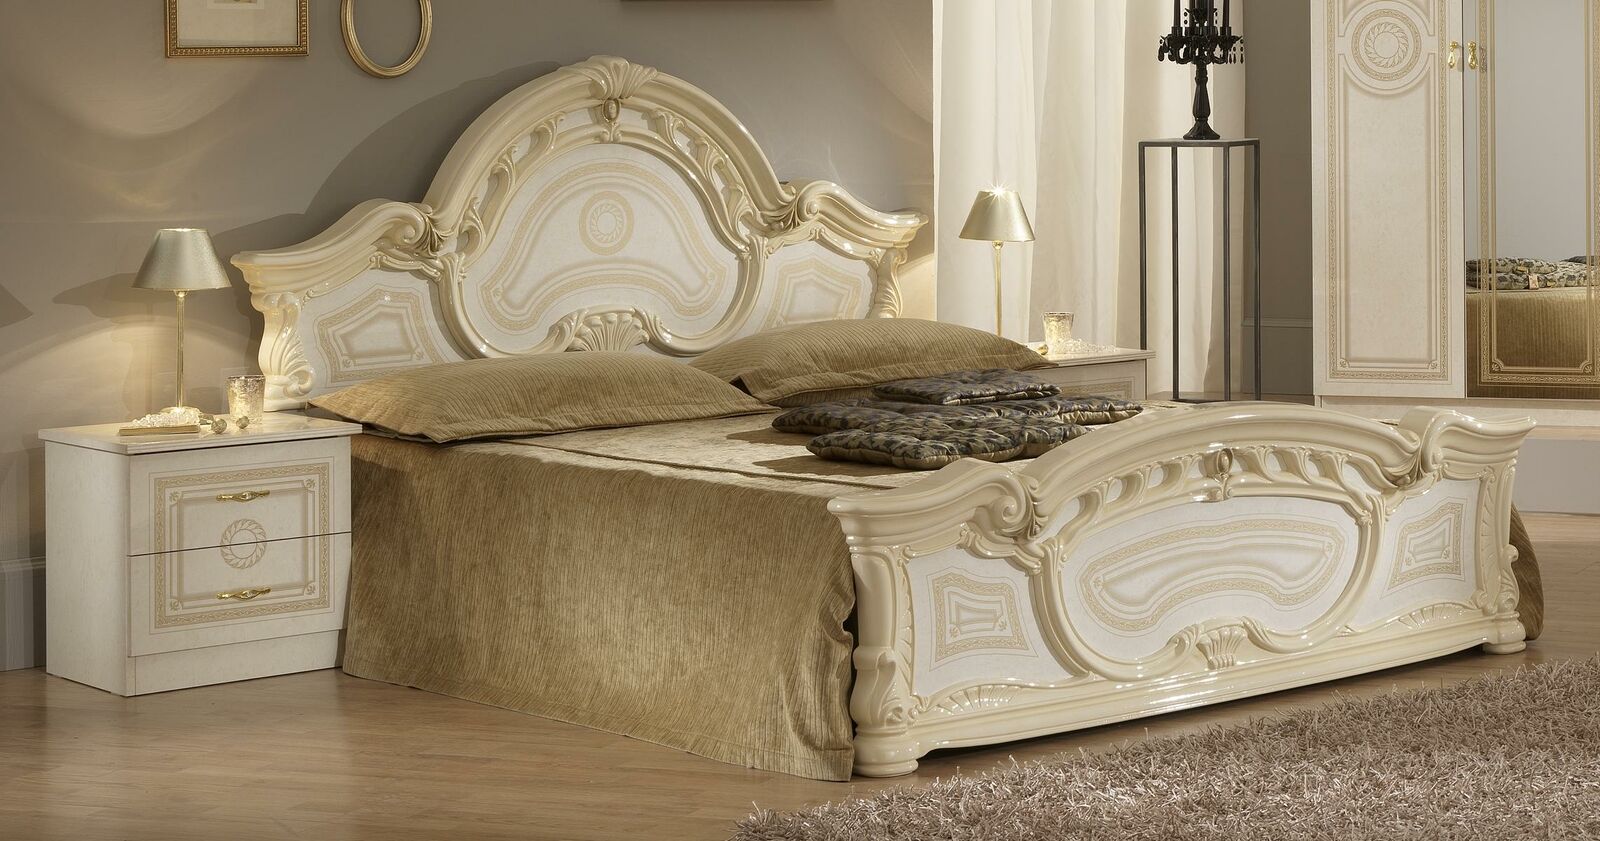 Classic style royal massive marriage gloss double bed made of real wooden frame 160x200cm sizes